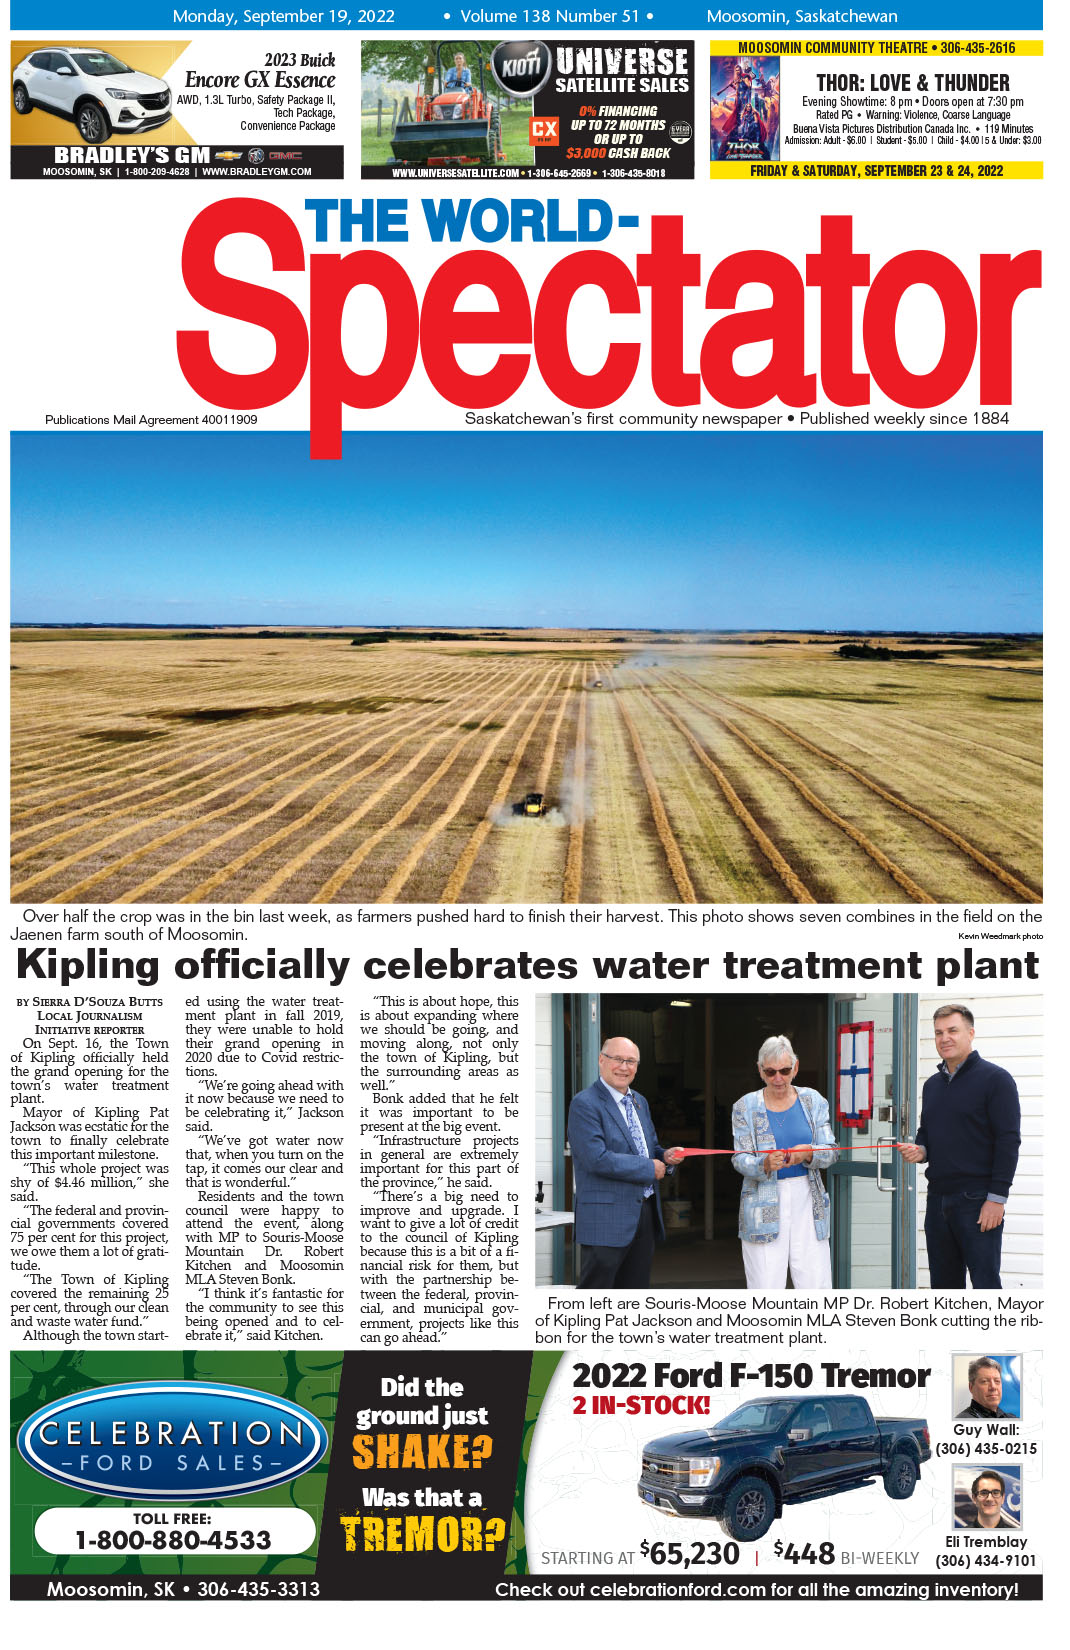 Kipling officially celebrates water treatment plant